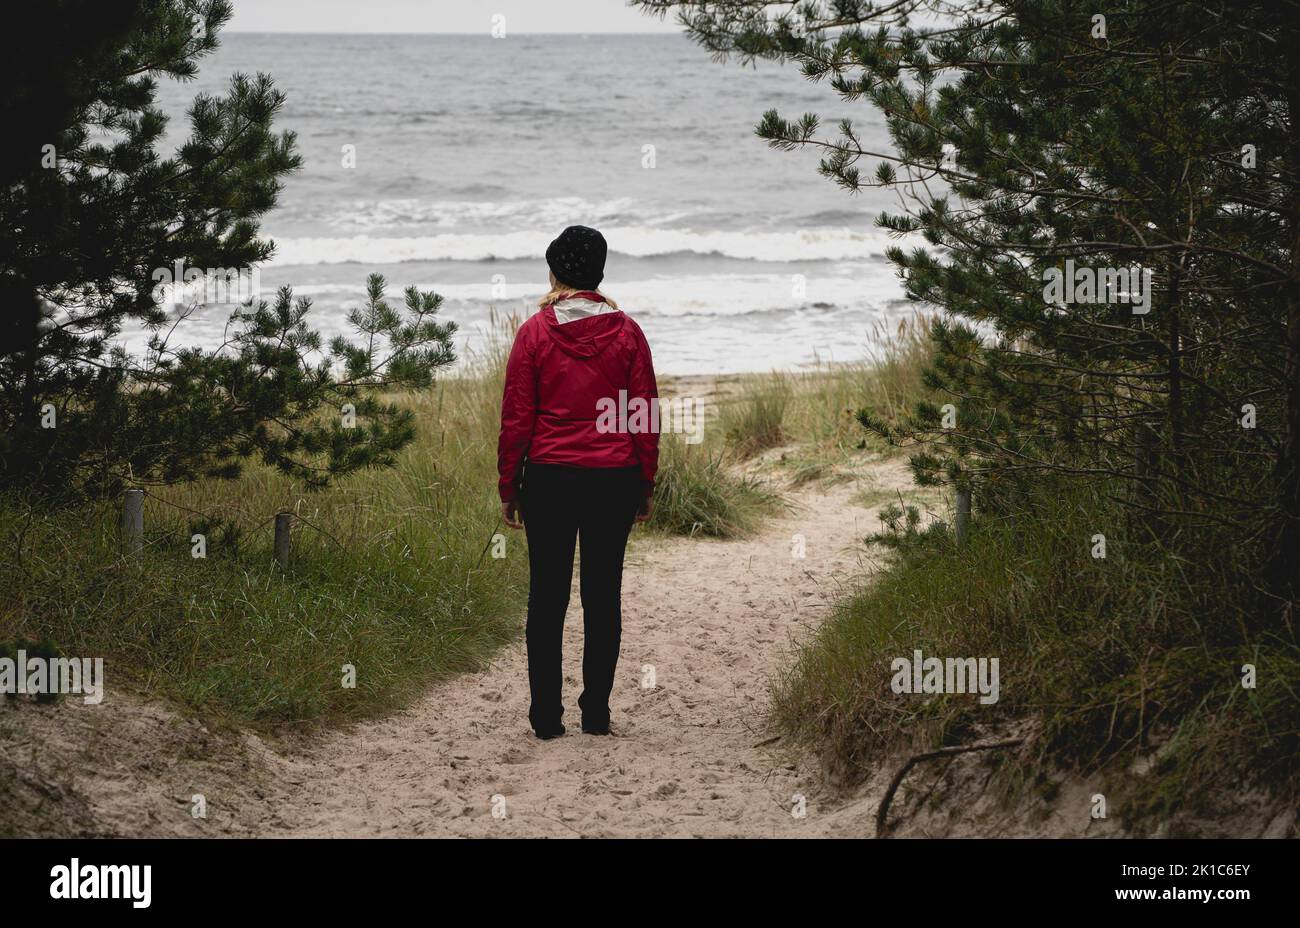 Woman in red standing on the sandy beach on the Baltic Sea, Ruegen Island, Germany Stock Photo